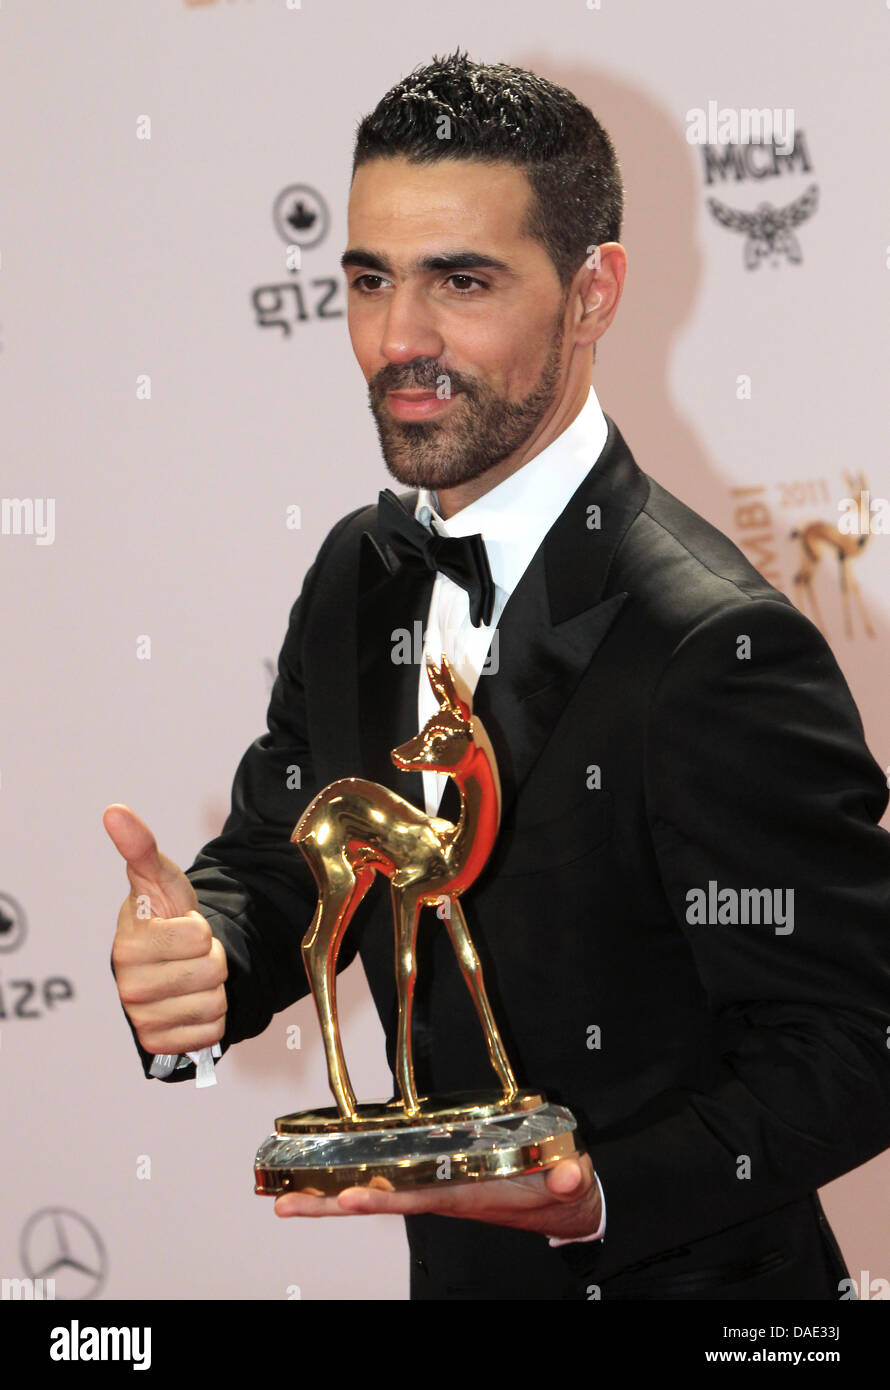 German singer Bushido poses with the Bambi trophy in the press room after the award ceremony in Wiesbaden, Germany, 10 November 2011. The Bambis are the main German media awards and are  presented for the 63rd  time. Photo: Frank Rumpenhorst dpa/lhe Stock Photo